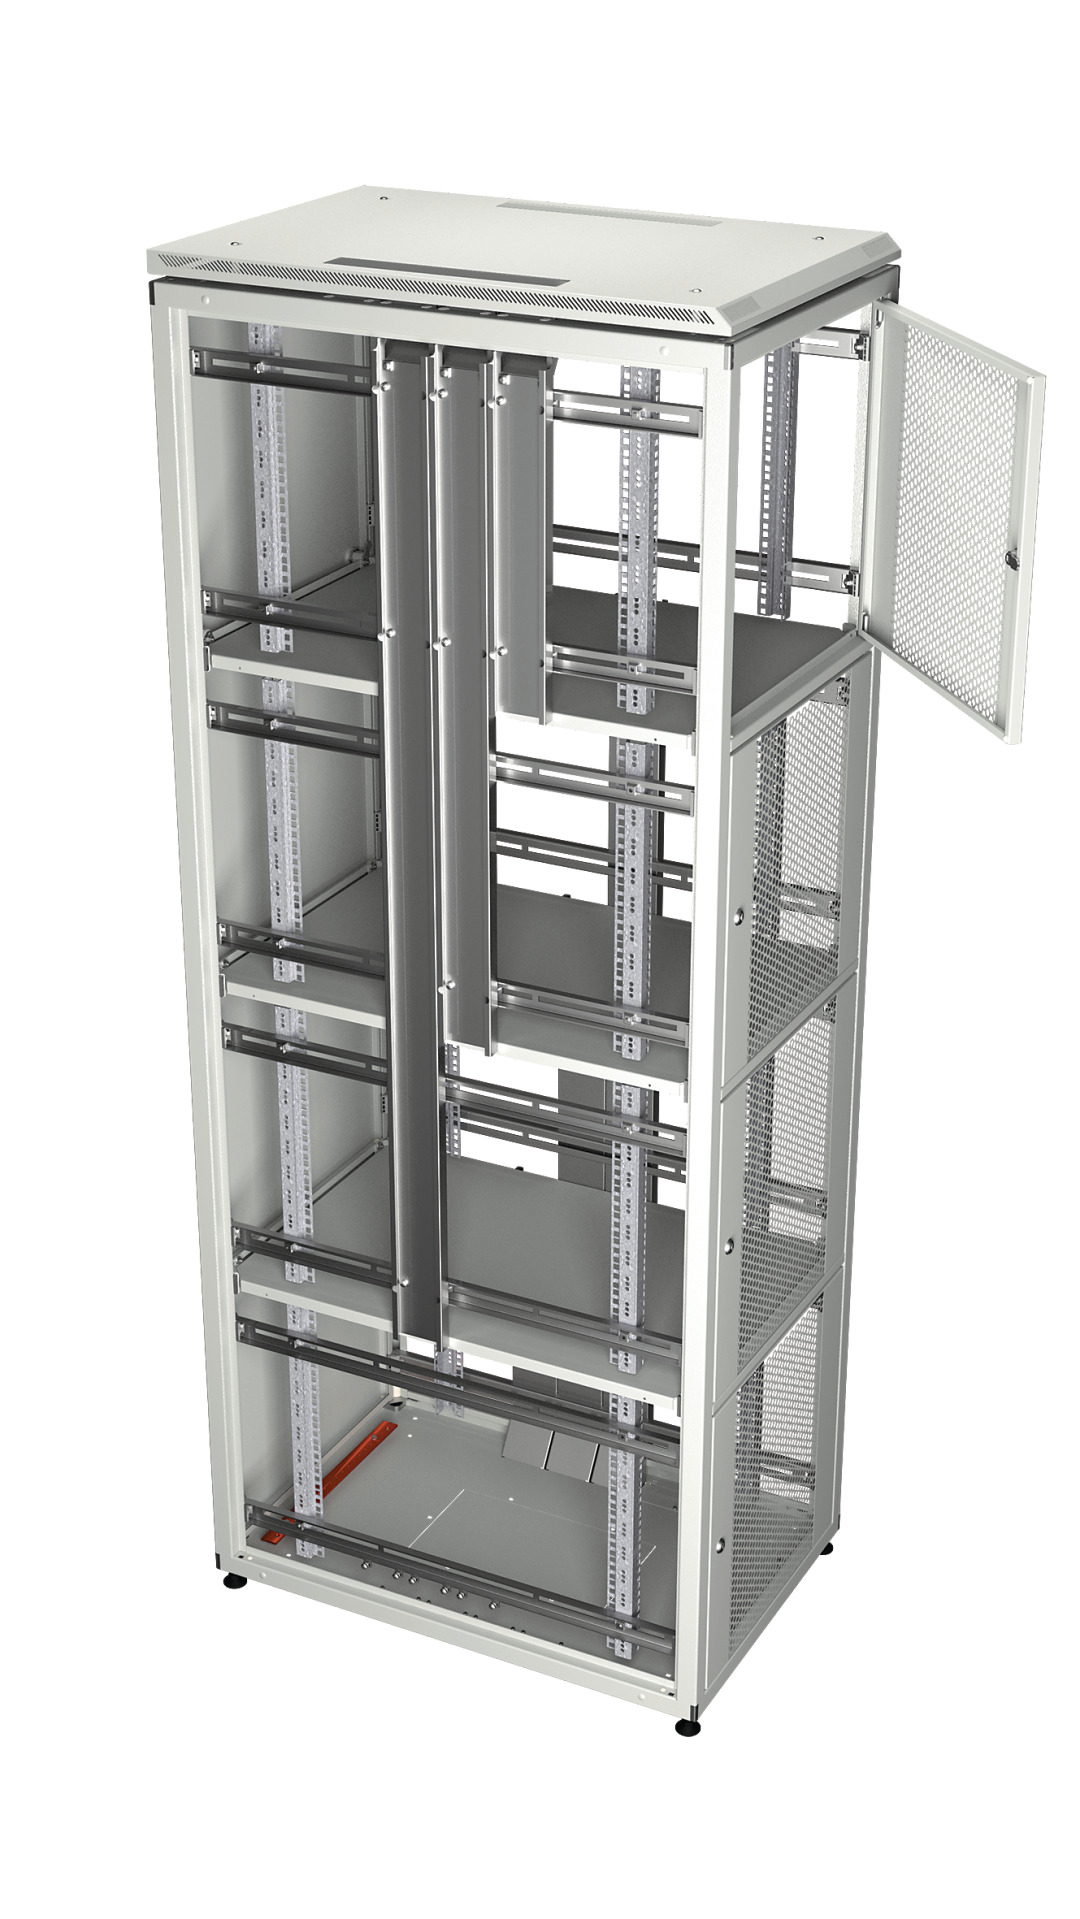 Co-Location Rack PRO, 1 x 42HE, 600x1000 mm, F+R 1-tlg. perforiert, RAL9005